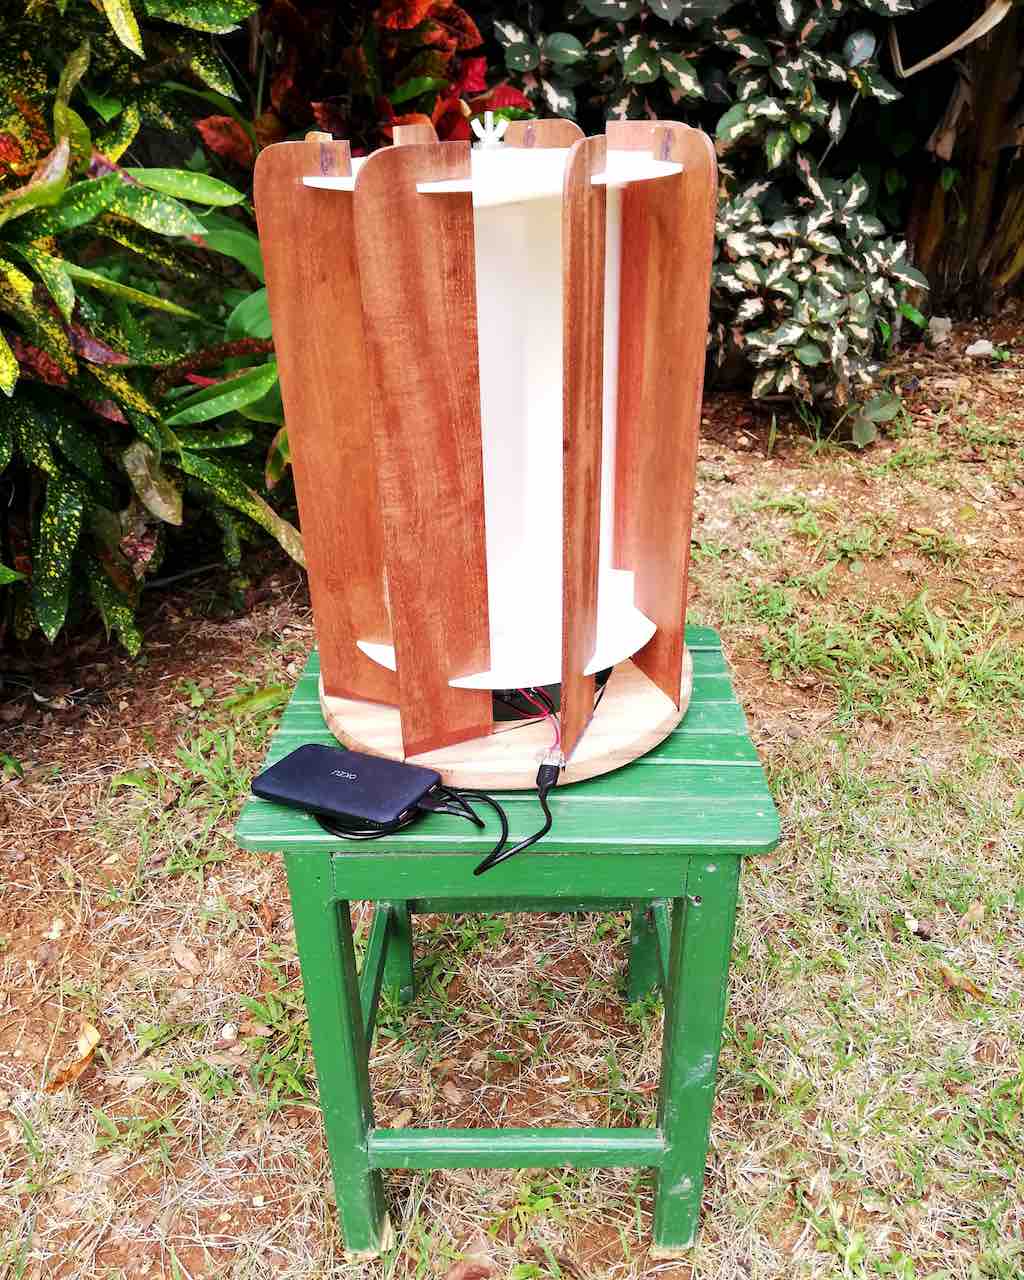 Step-by-step guide to making a Savonius Vertical Axis Portable Wind Turbine